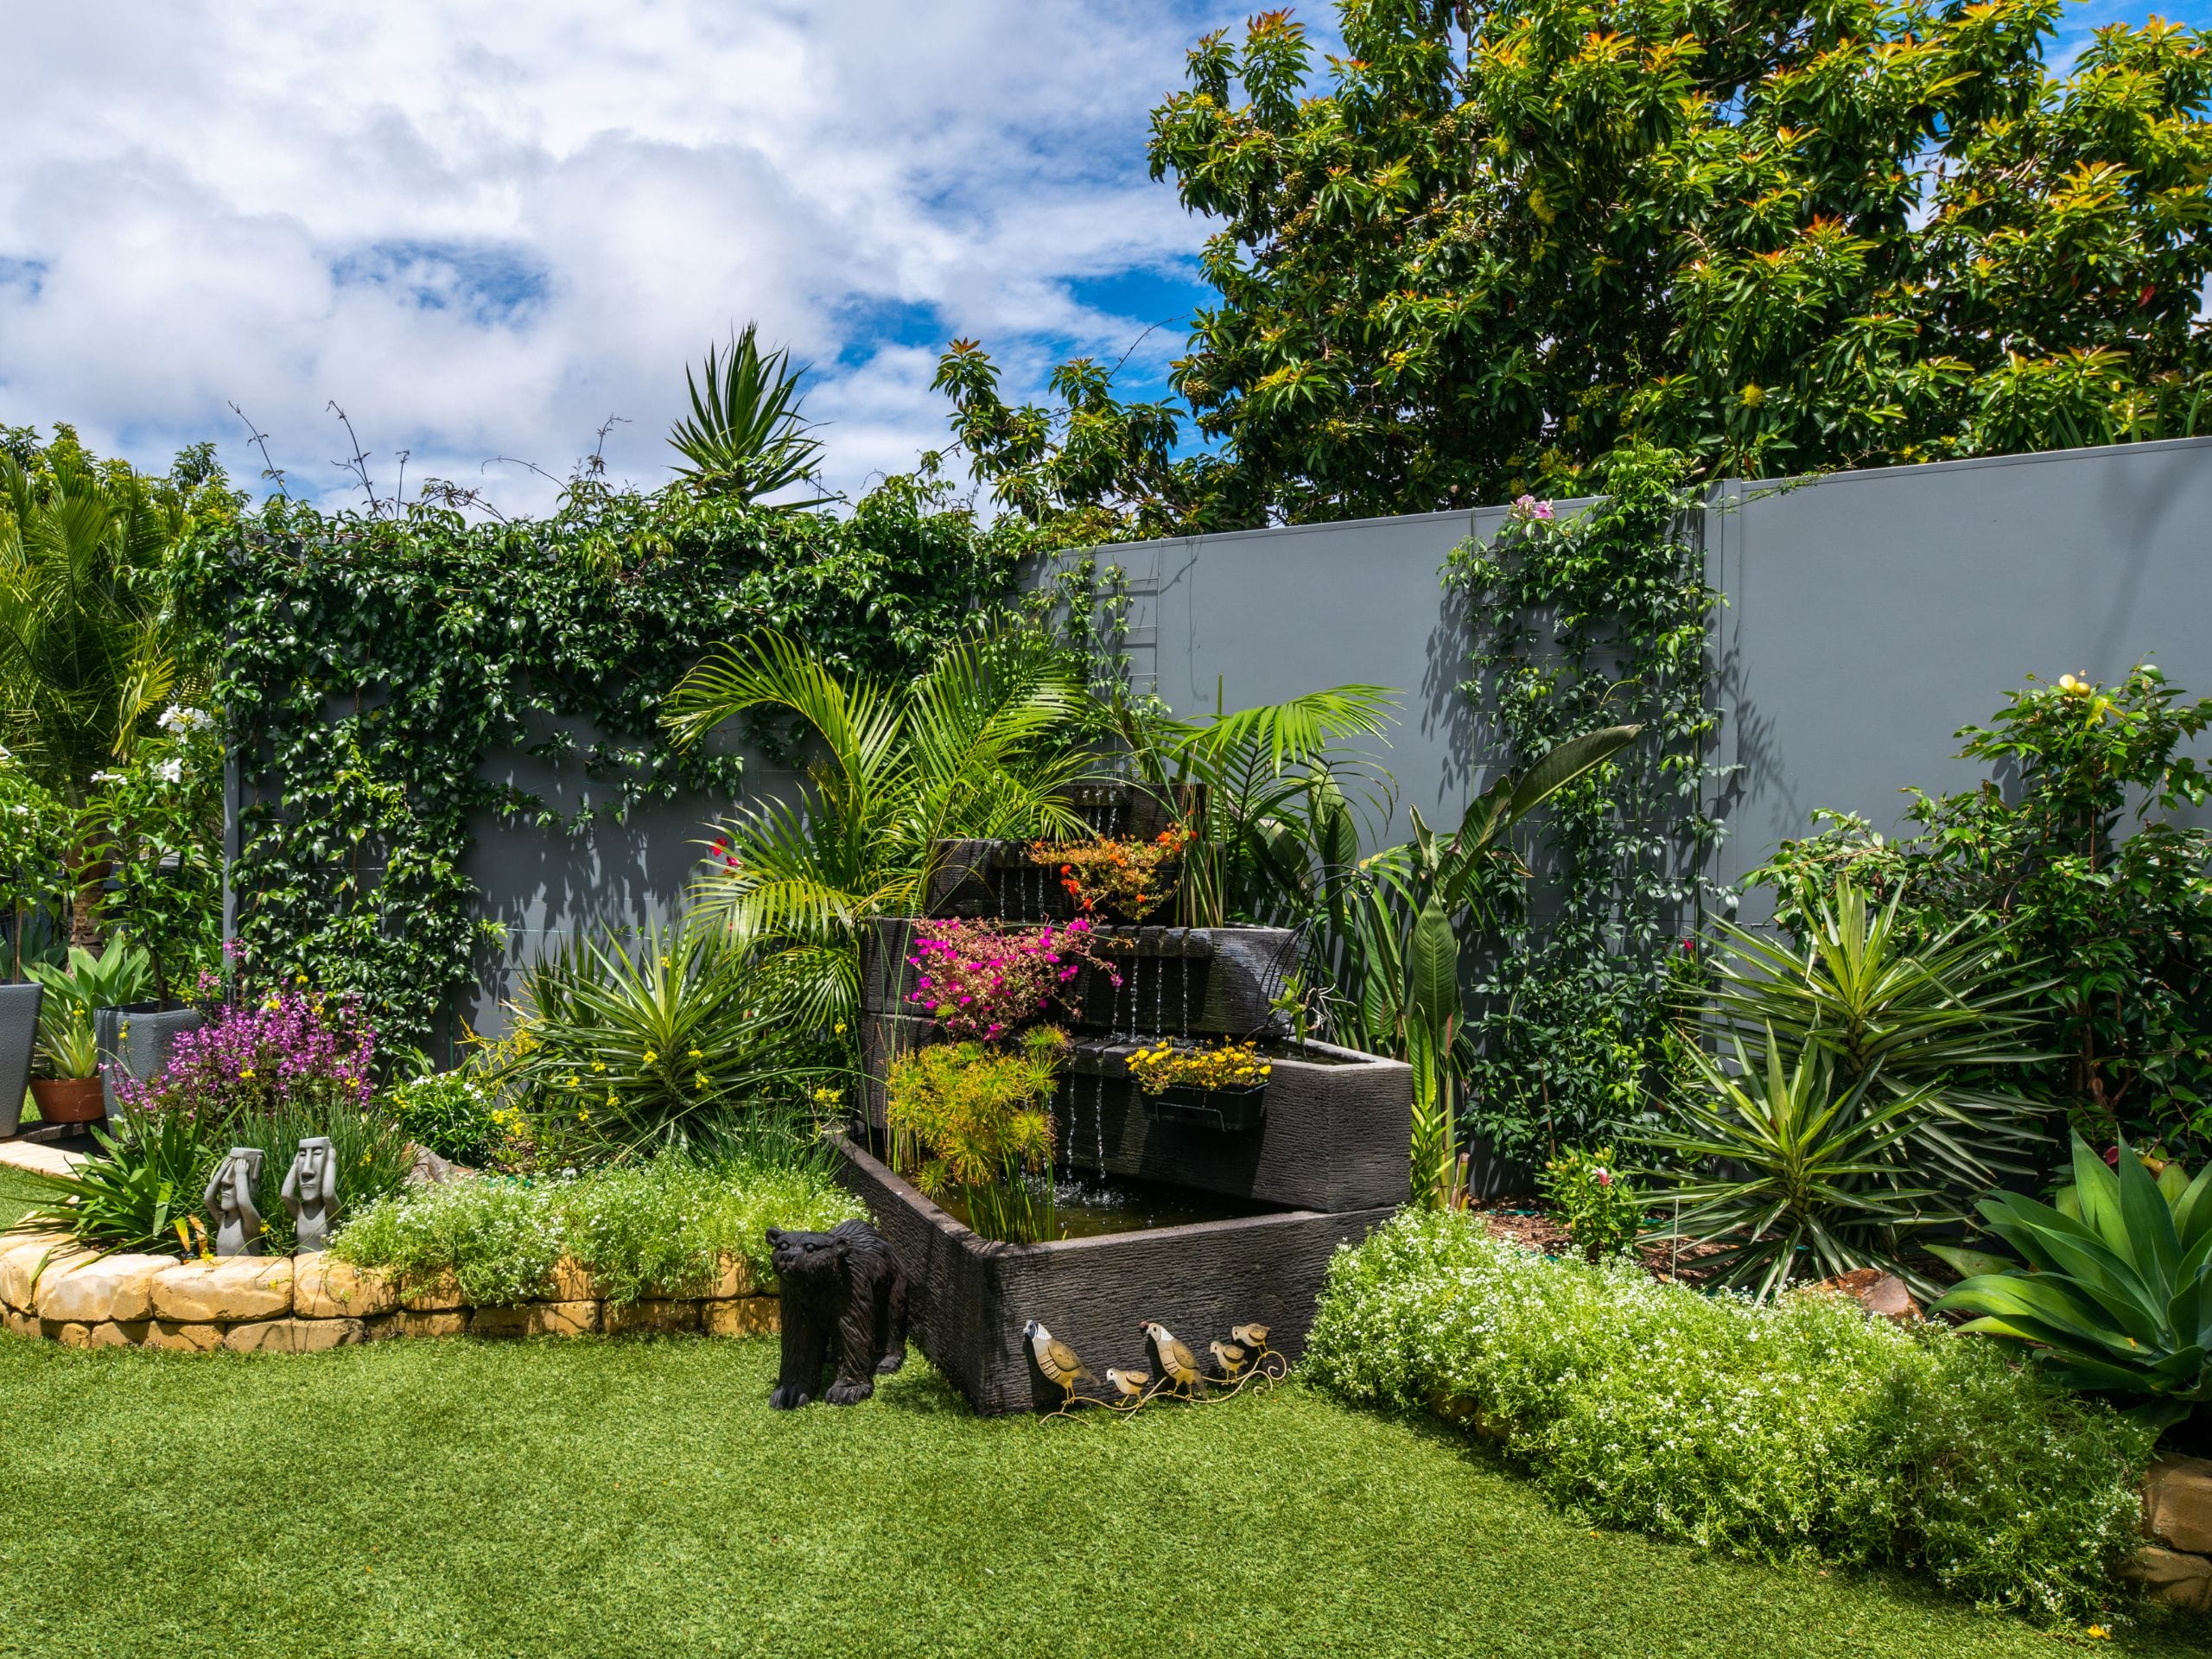 A whimsical garden provides a riot of colour with a grey SlimWall boundary fence making the perfect backdrop